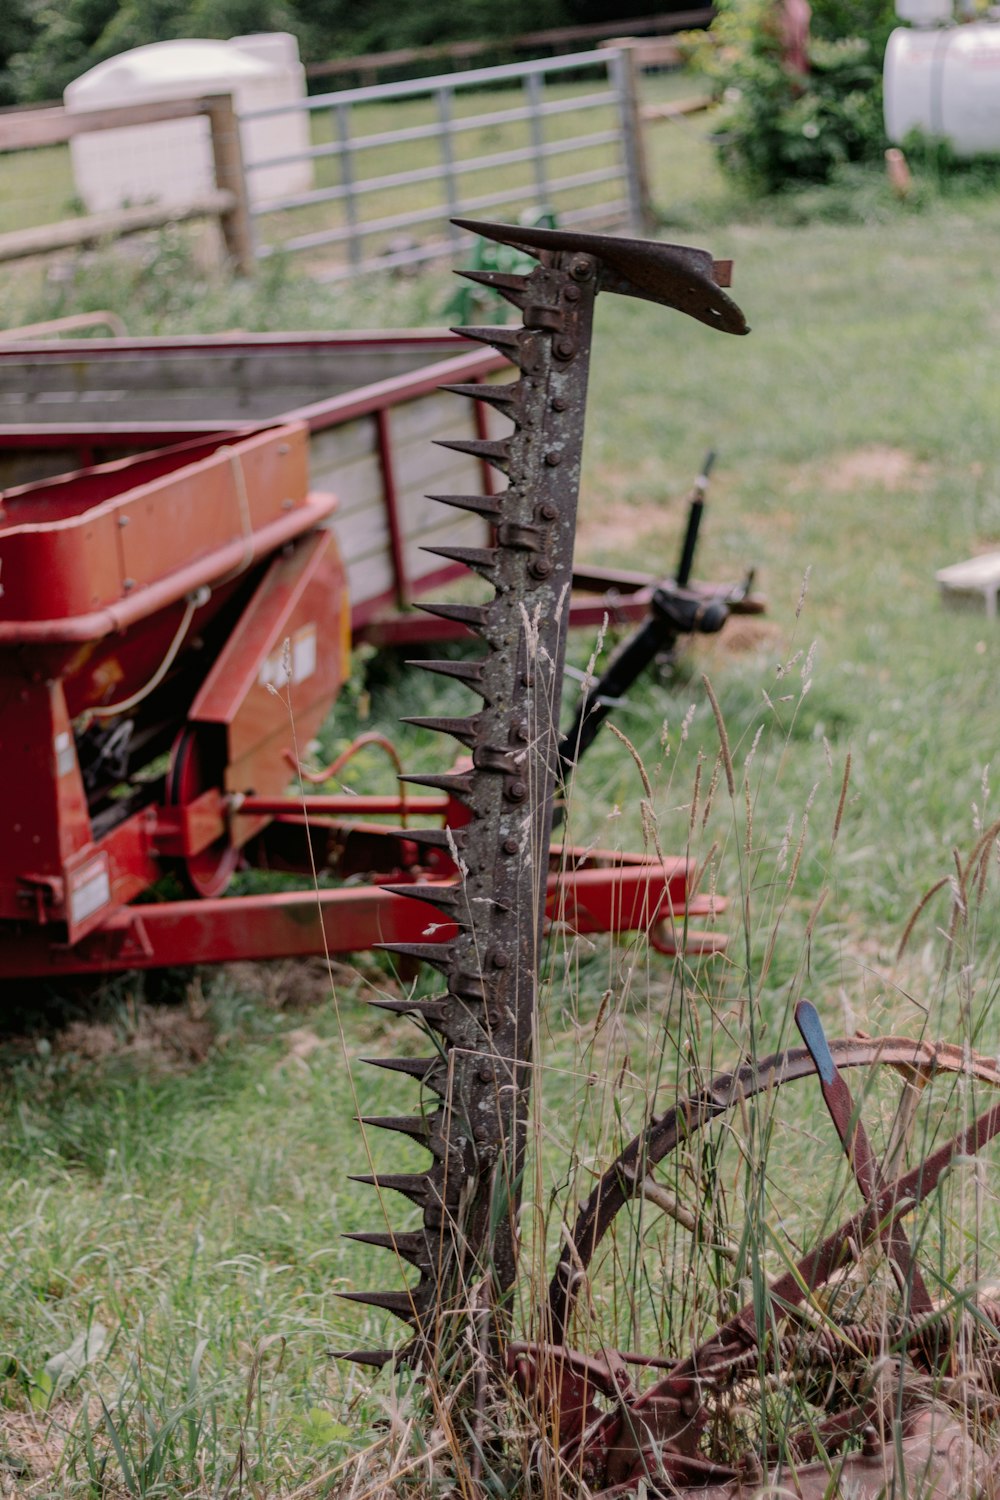 a red tractor with a large metal rake attached to it